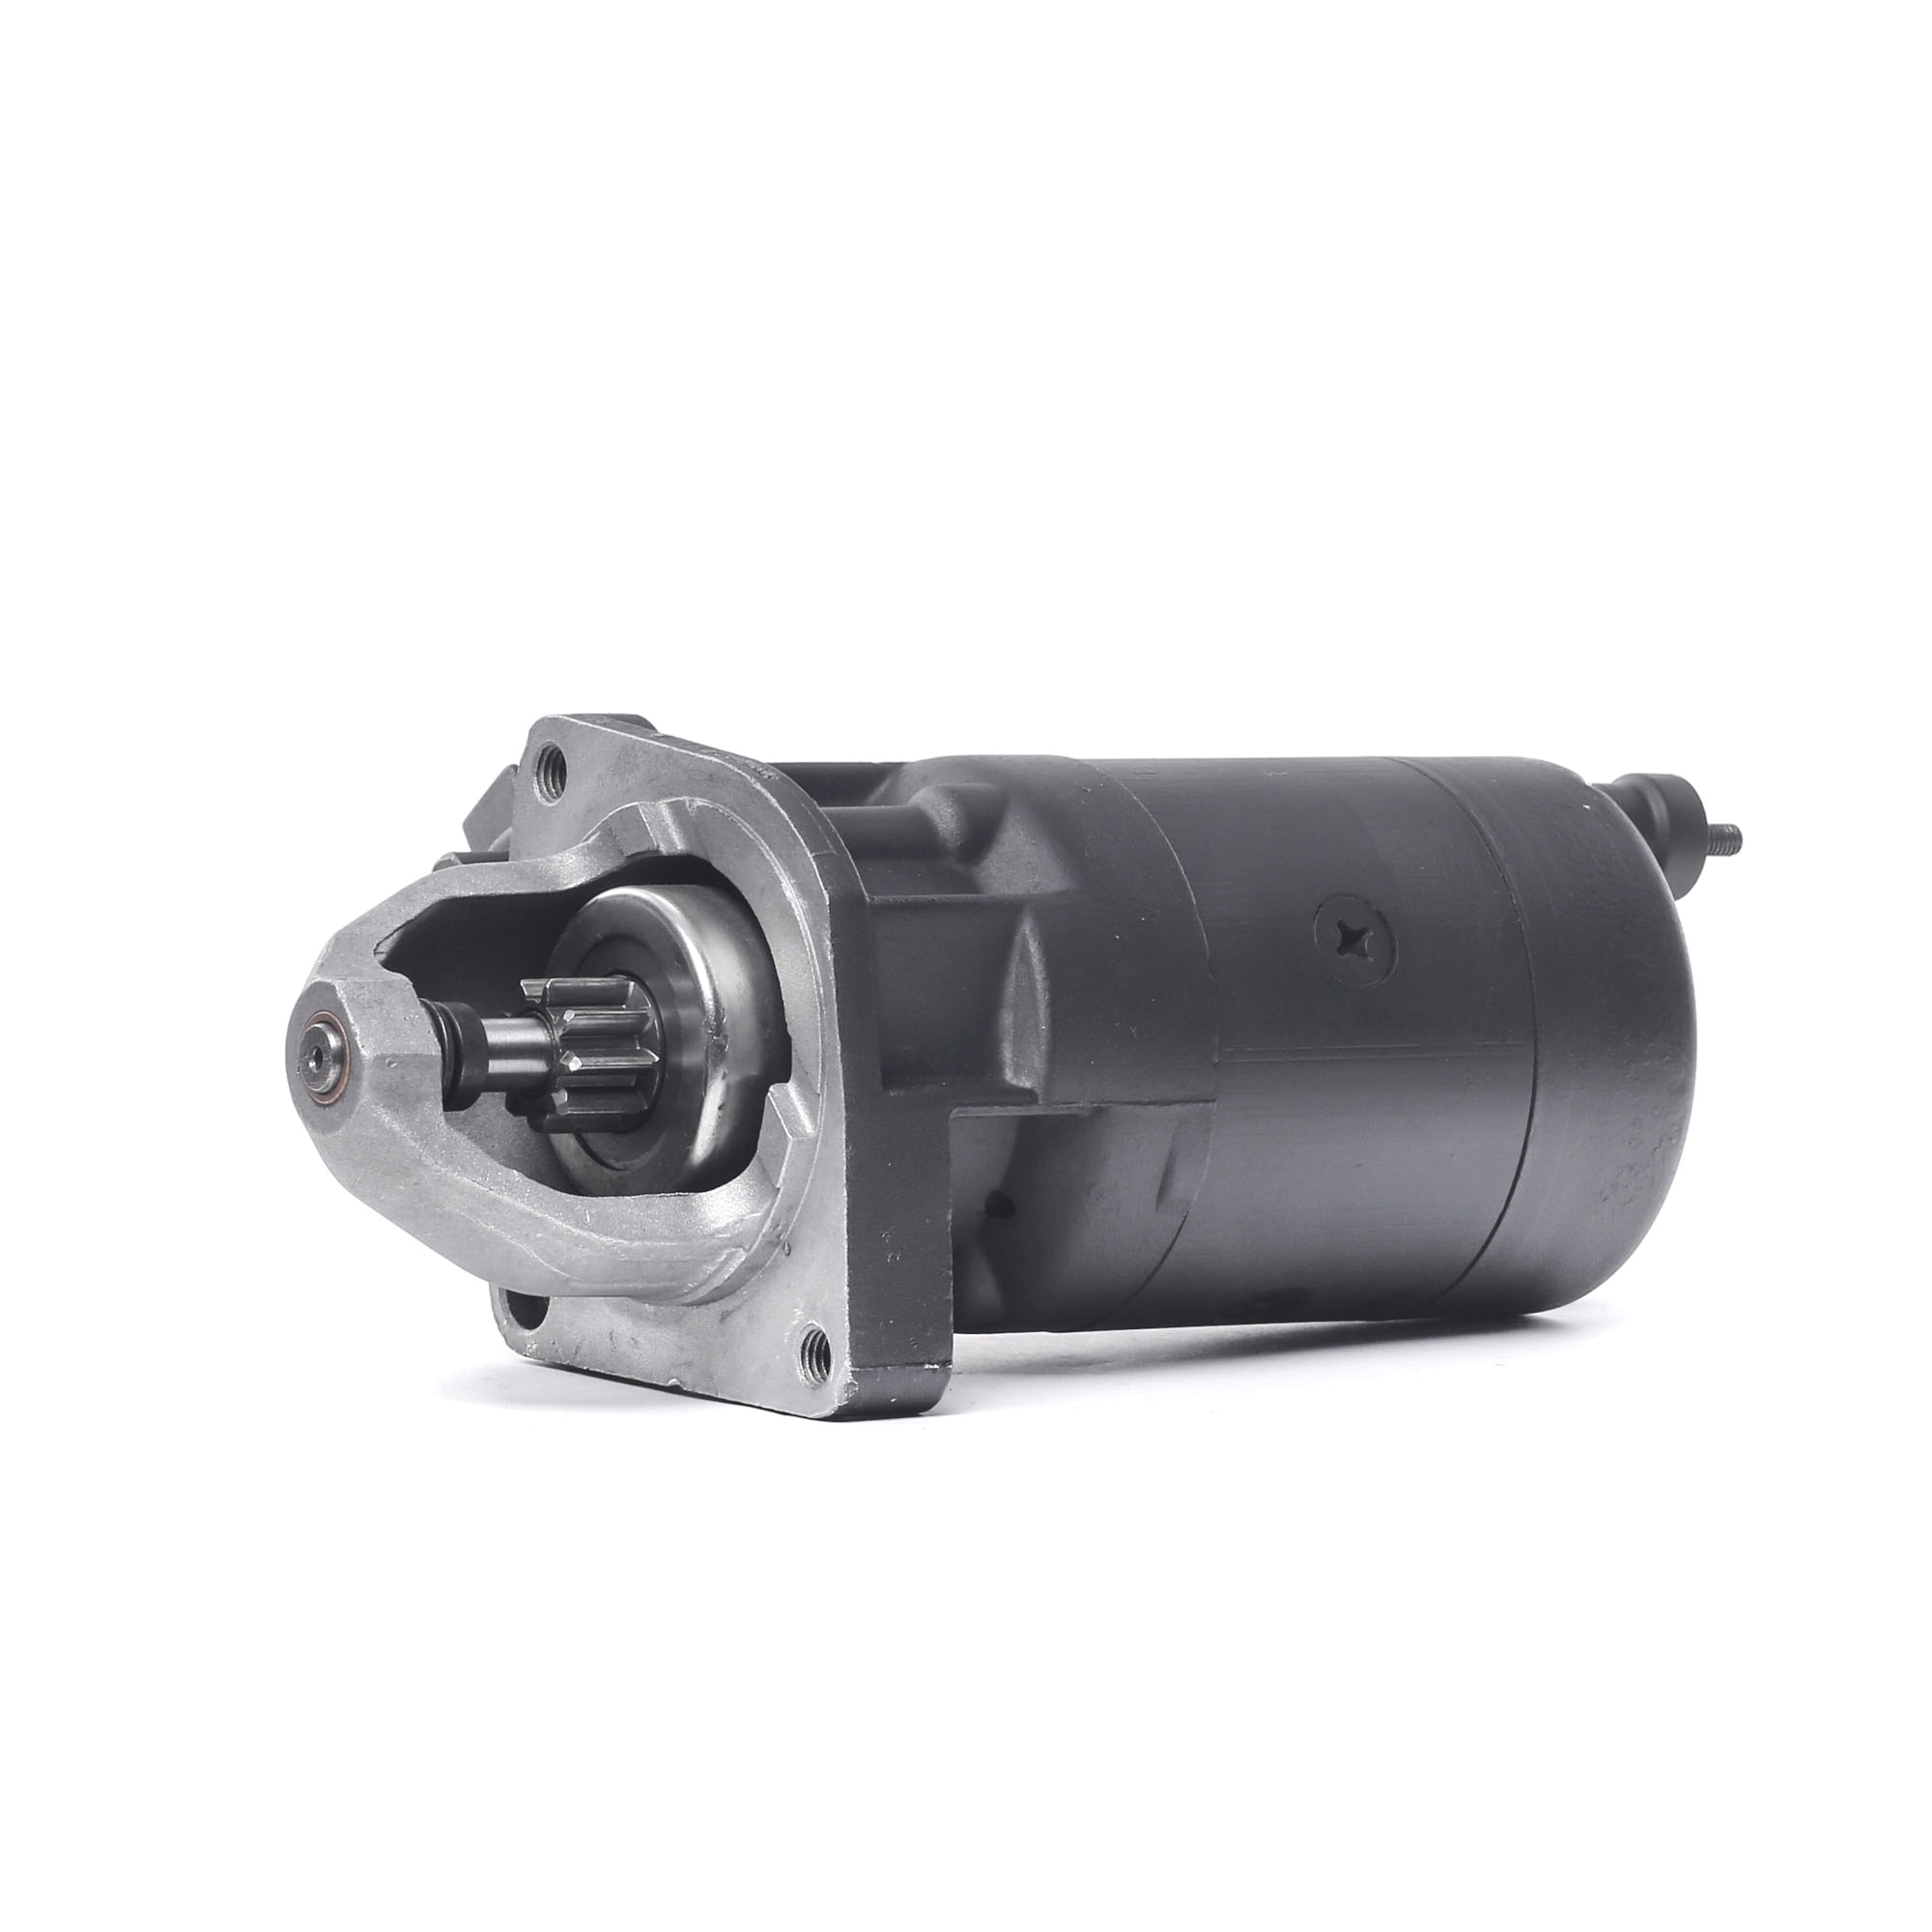 RIDEX REMAN 2S0176R Starter motor 12V, 2,2kW, Number of Teeth: 9, with 50(Jet) clamp, Ø 81 mm